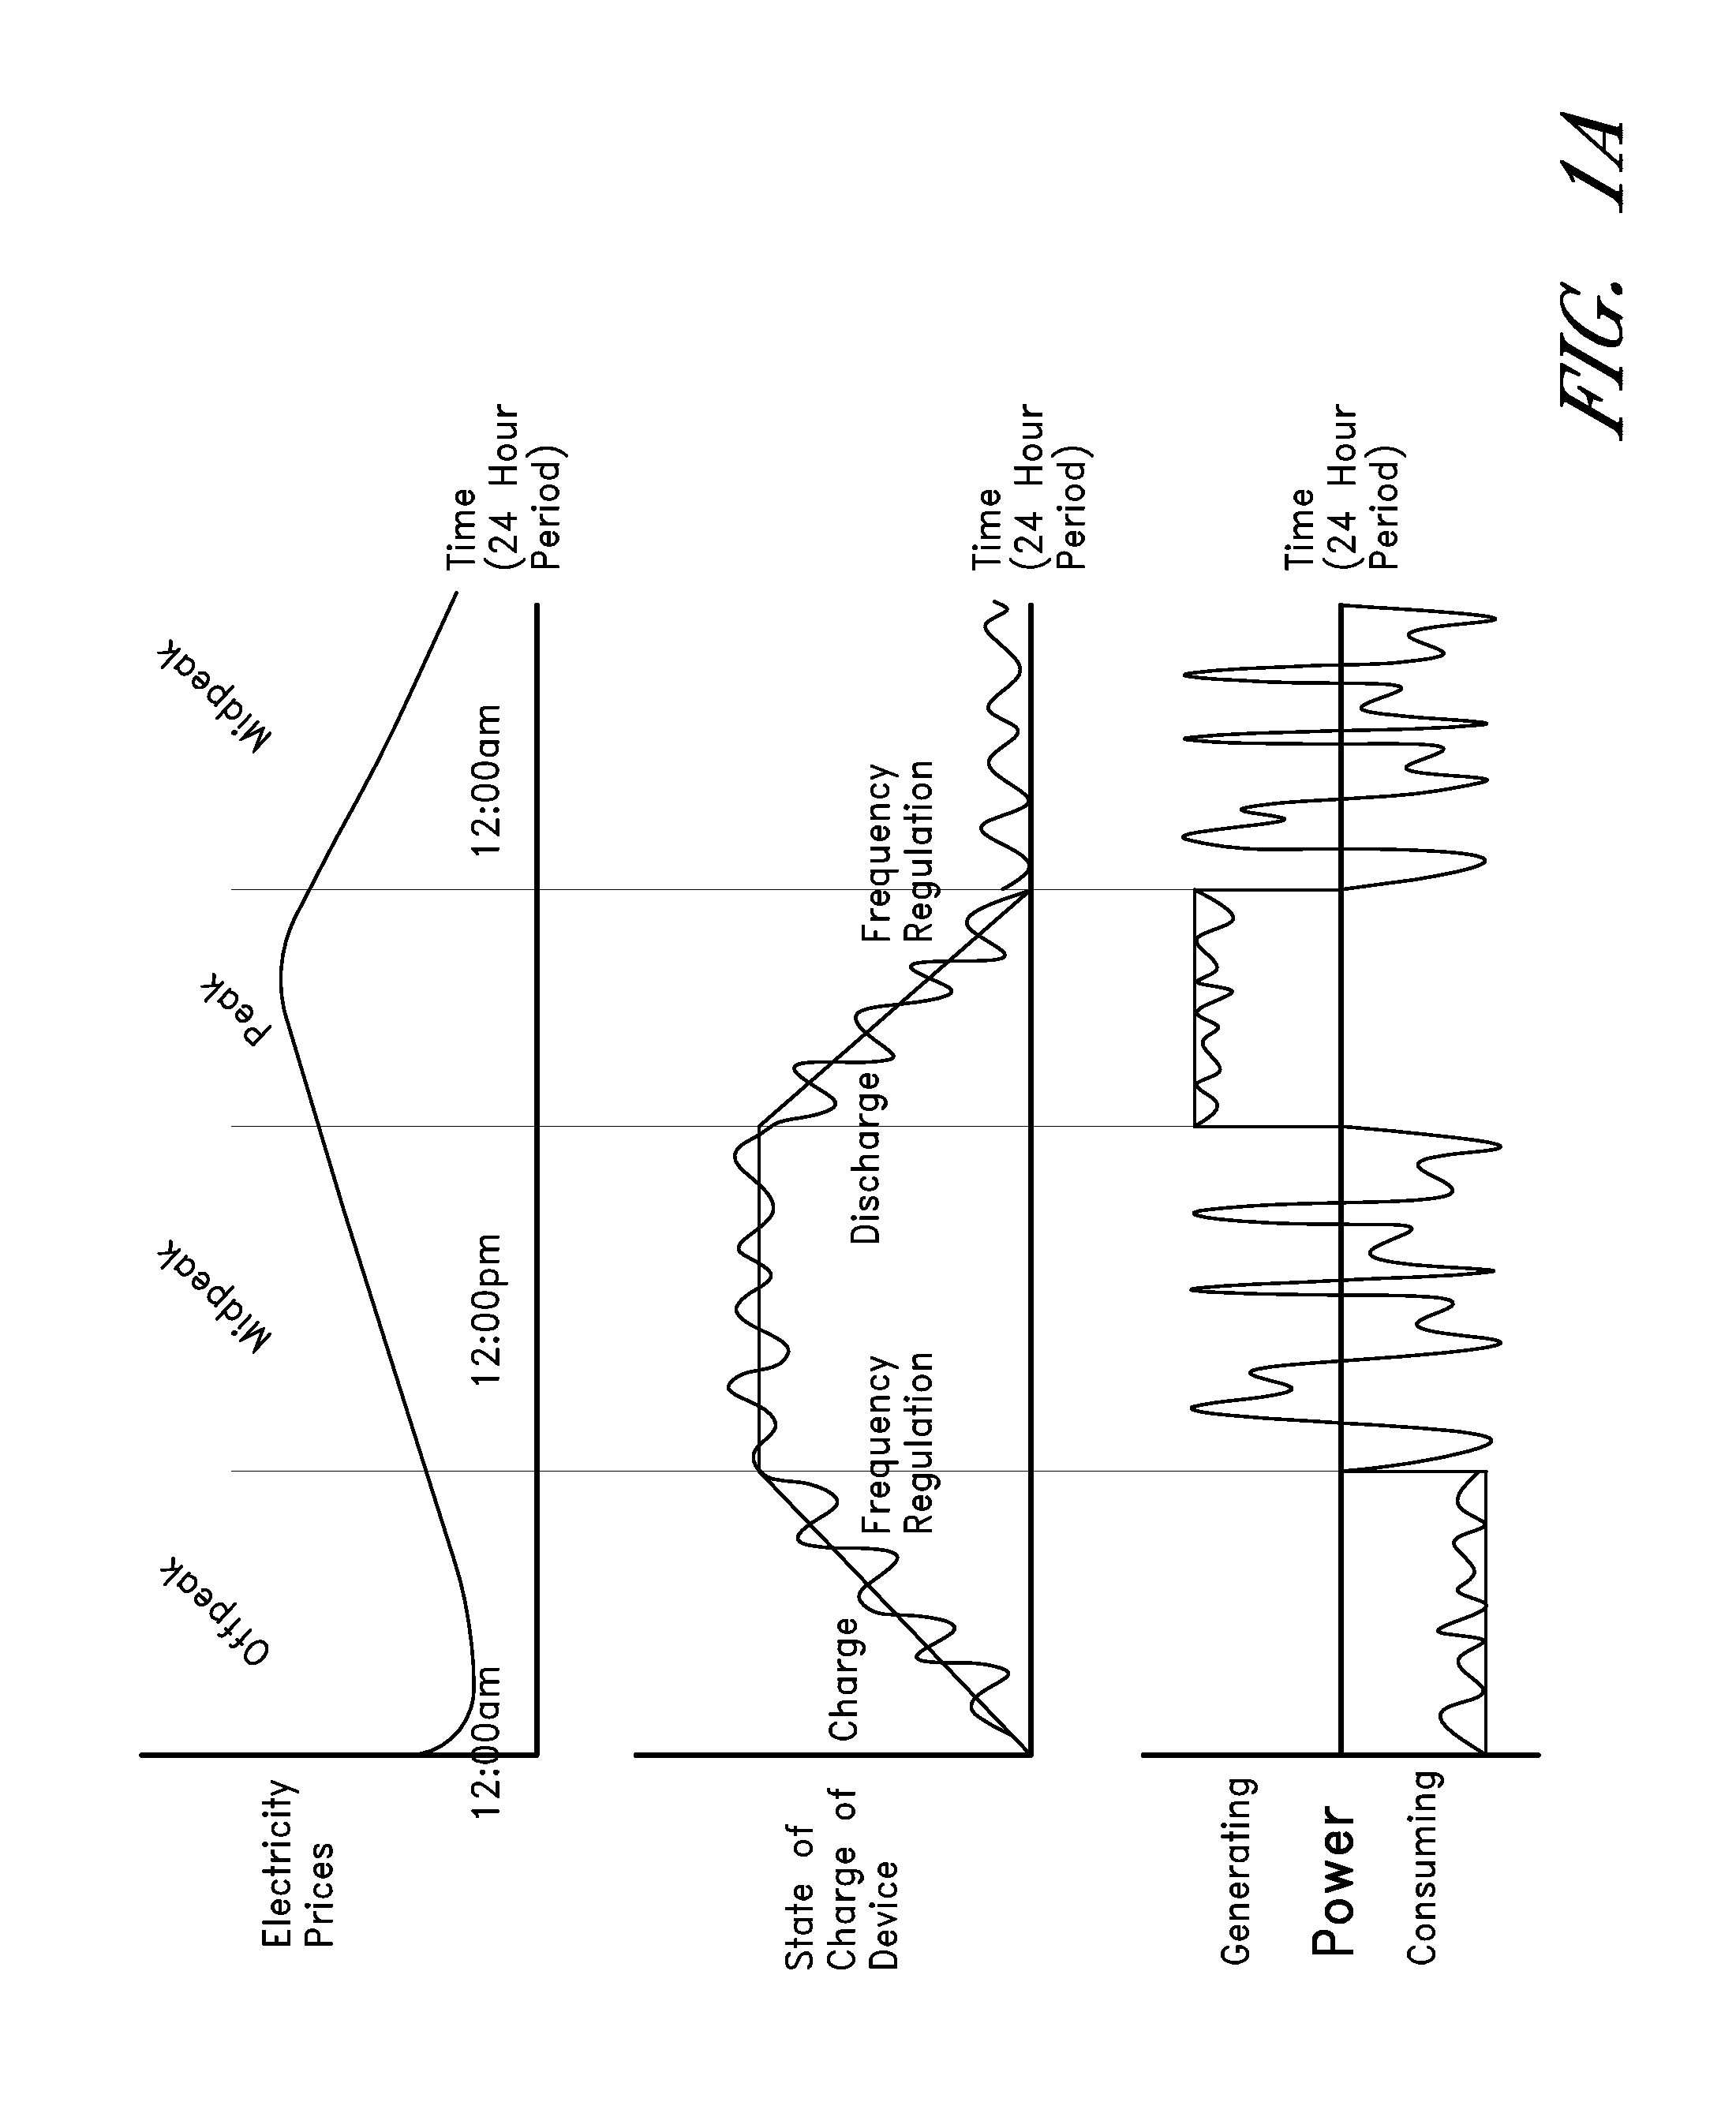 Apparatuses and methods for energy storage